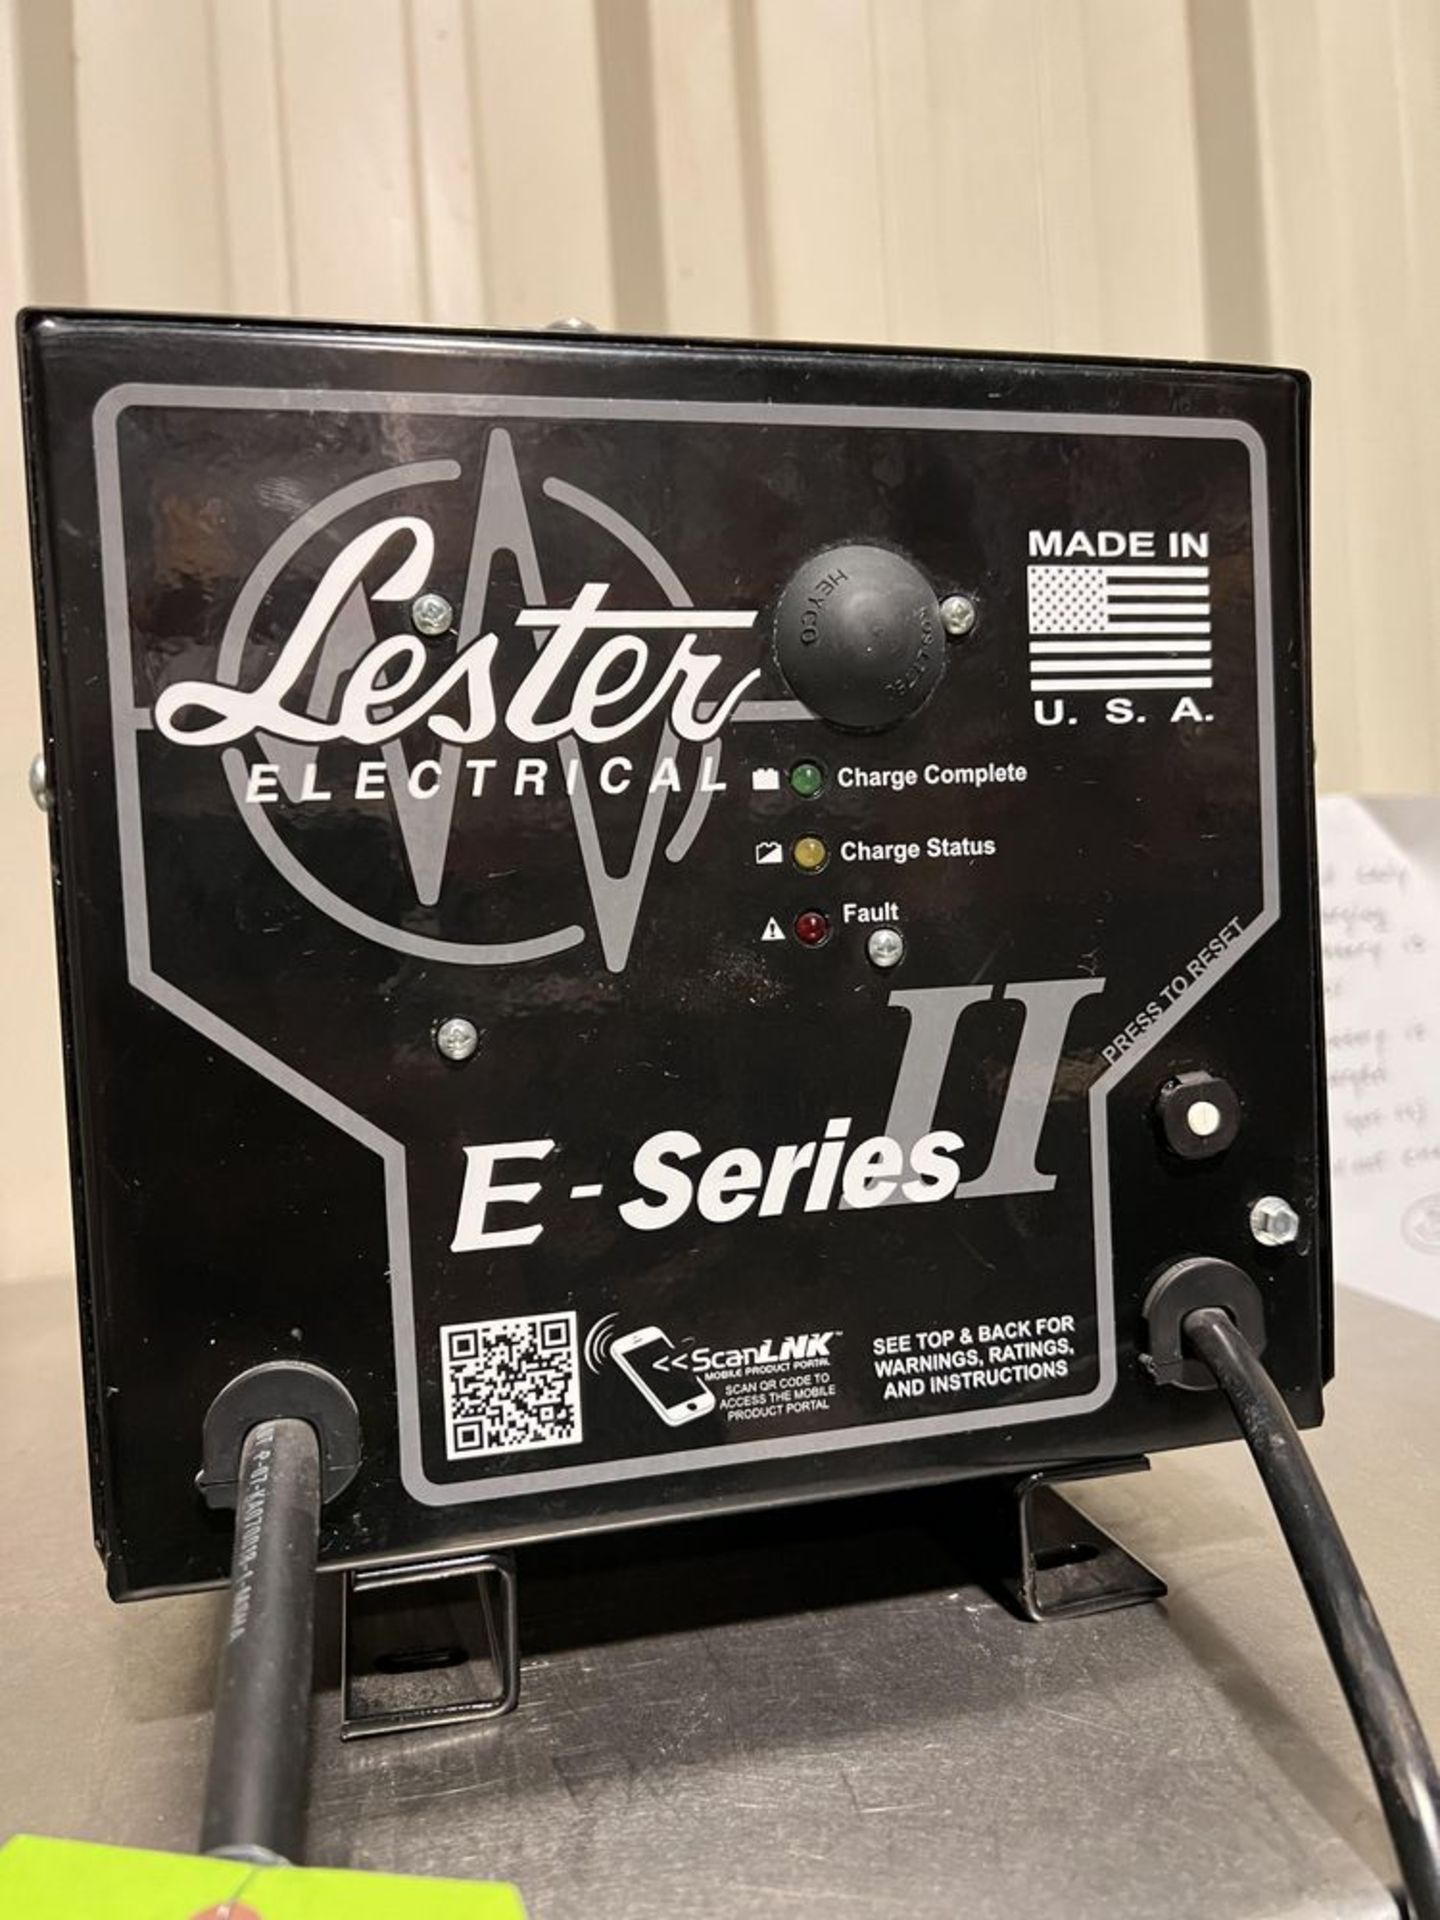 LESTER ELECTRICAL E-SERIES 2 BATTERY CHARGER, MODEL 28060A03N181W1A1, 120 V, 1 PHASE, 60 HZ - Image 2 of 4